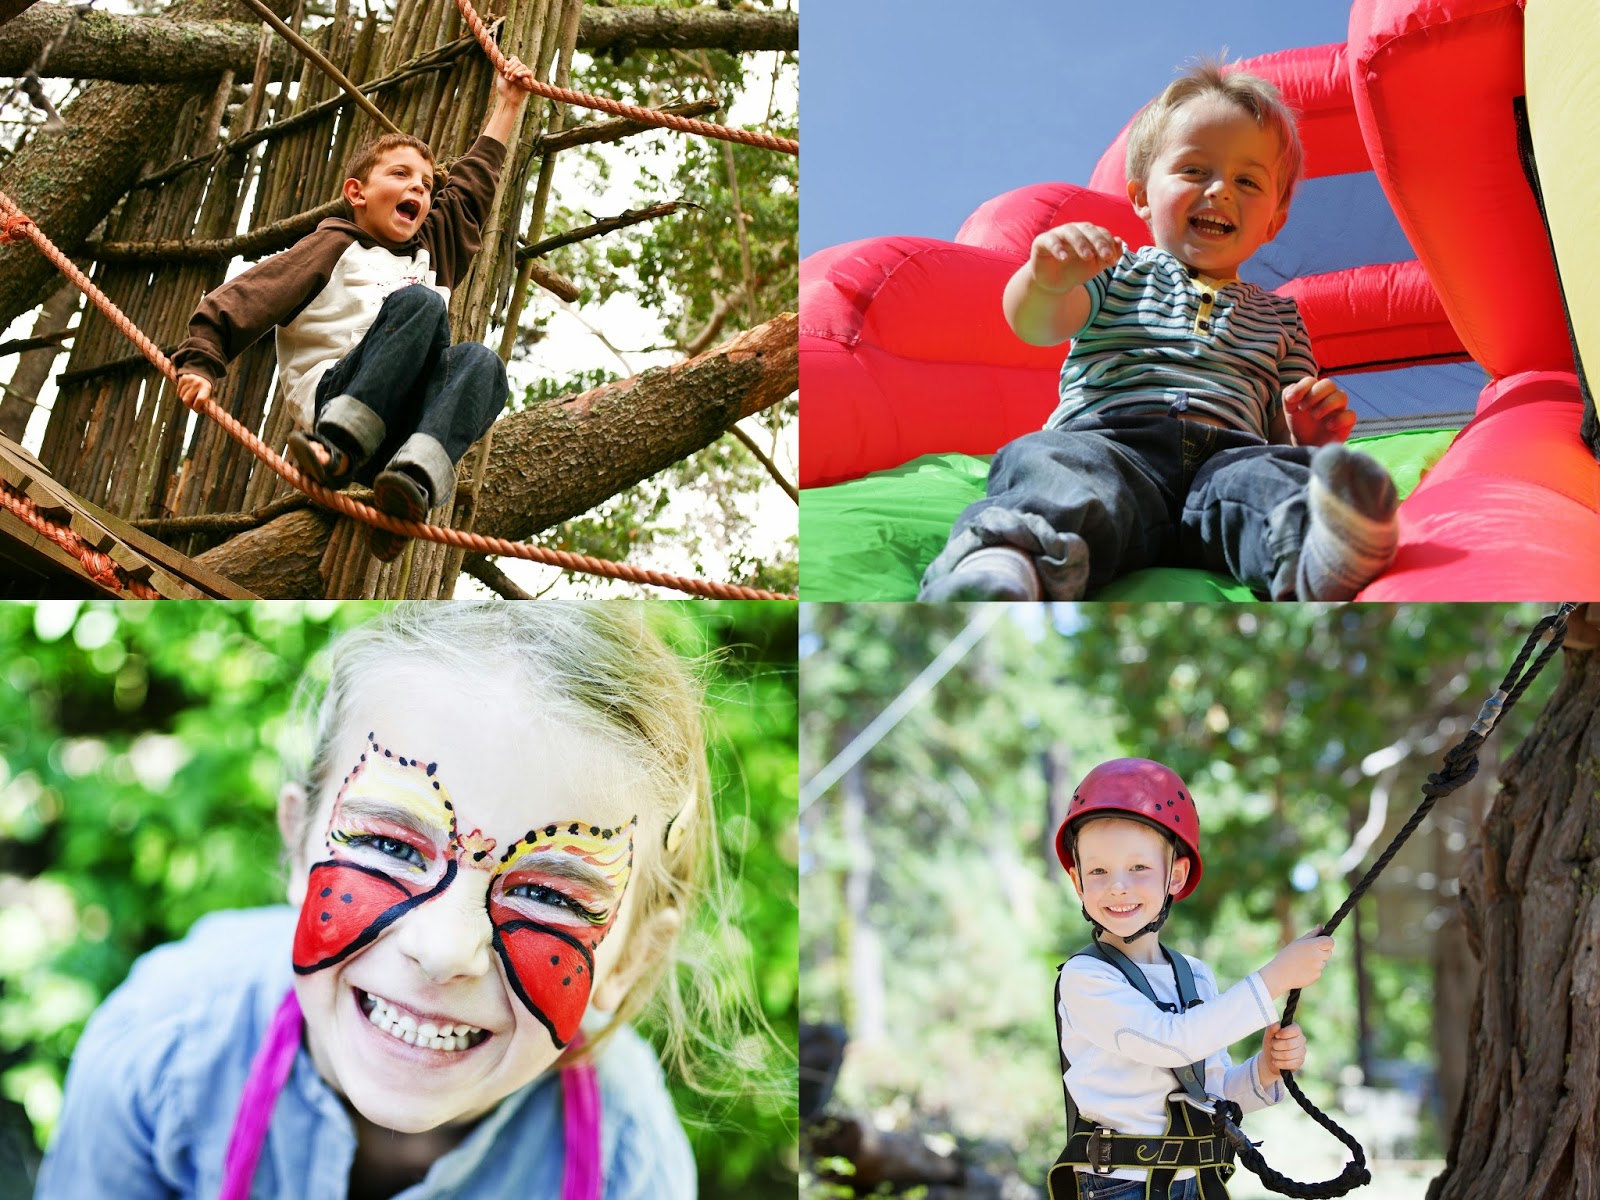 Activities at Geronimo Festival at Tatton Park in May 2015